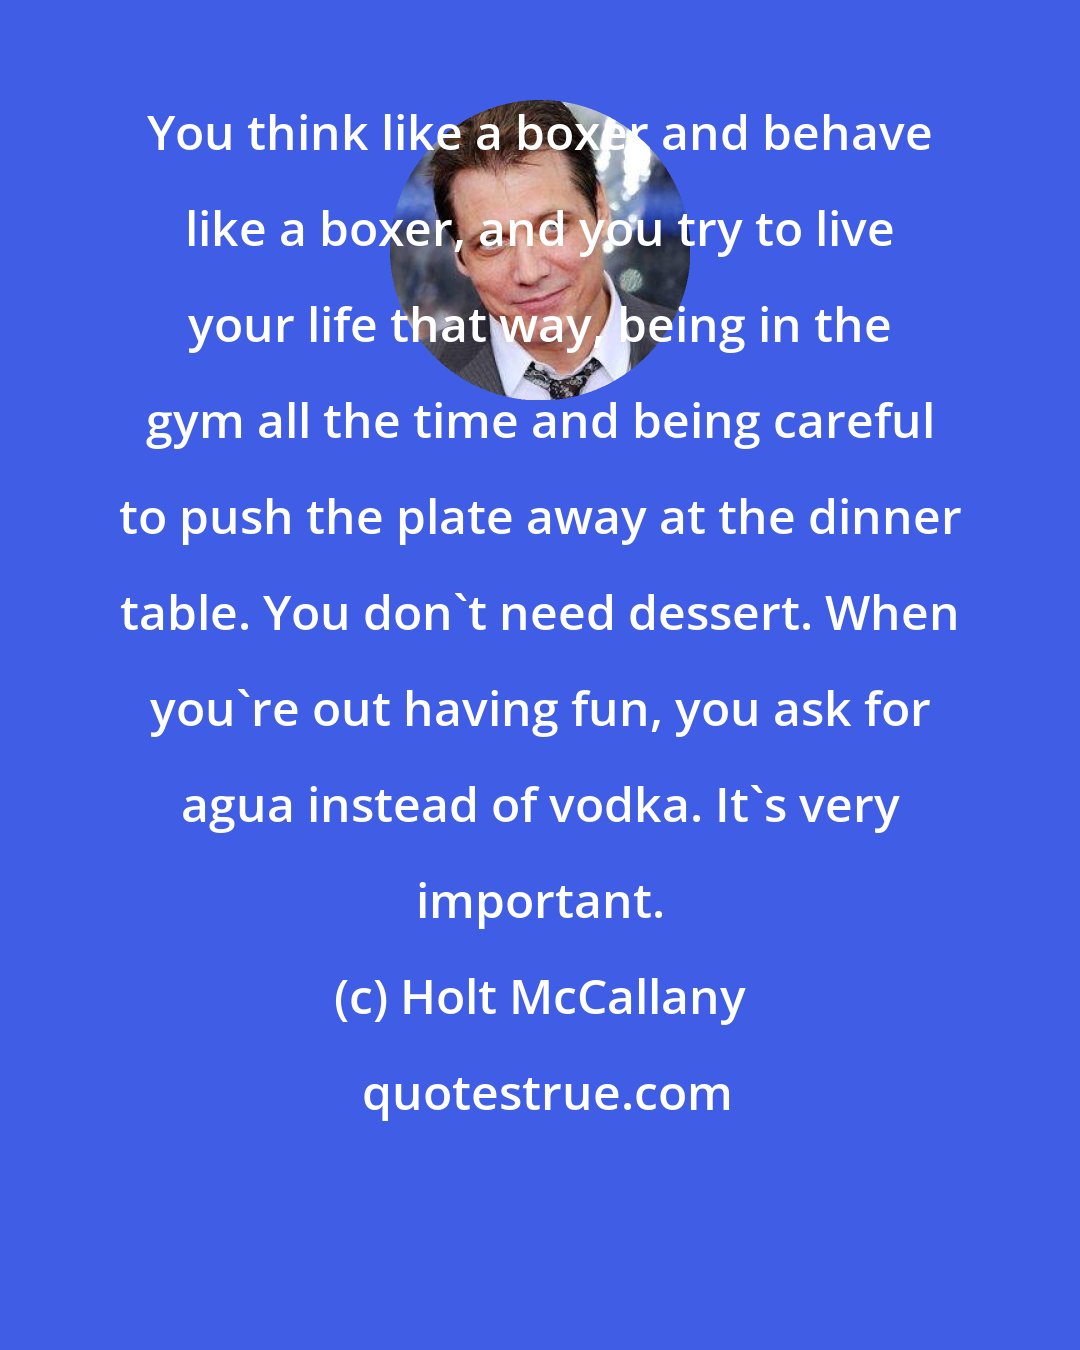 Holt McCallany: You think like a boxer and behave like a boxer, and you try to live your life that way, being in the gym all the time and being careful to push the plate away at the dinner table. You don't need dessert. When you're out having fun, you ask for agua instead of vodka. It's very important.